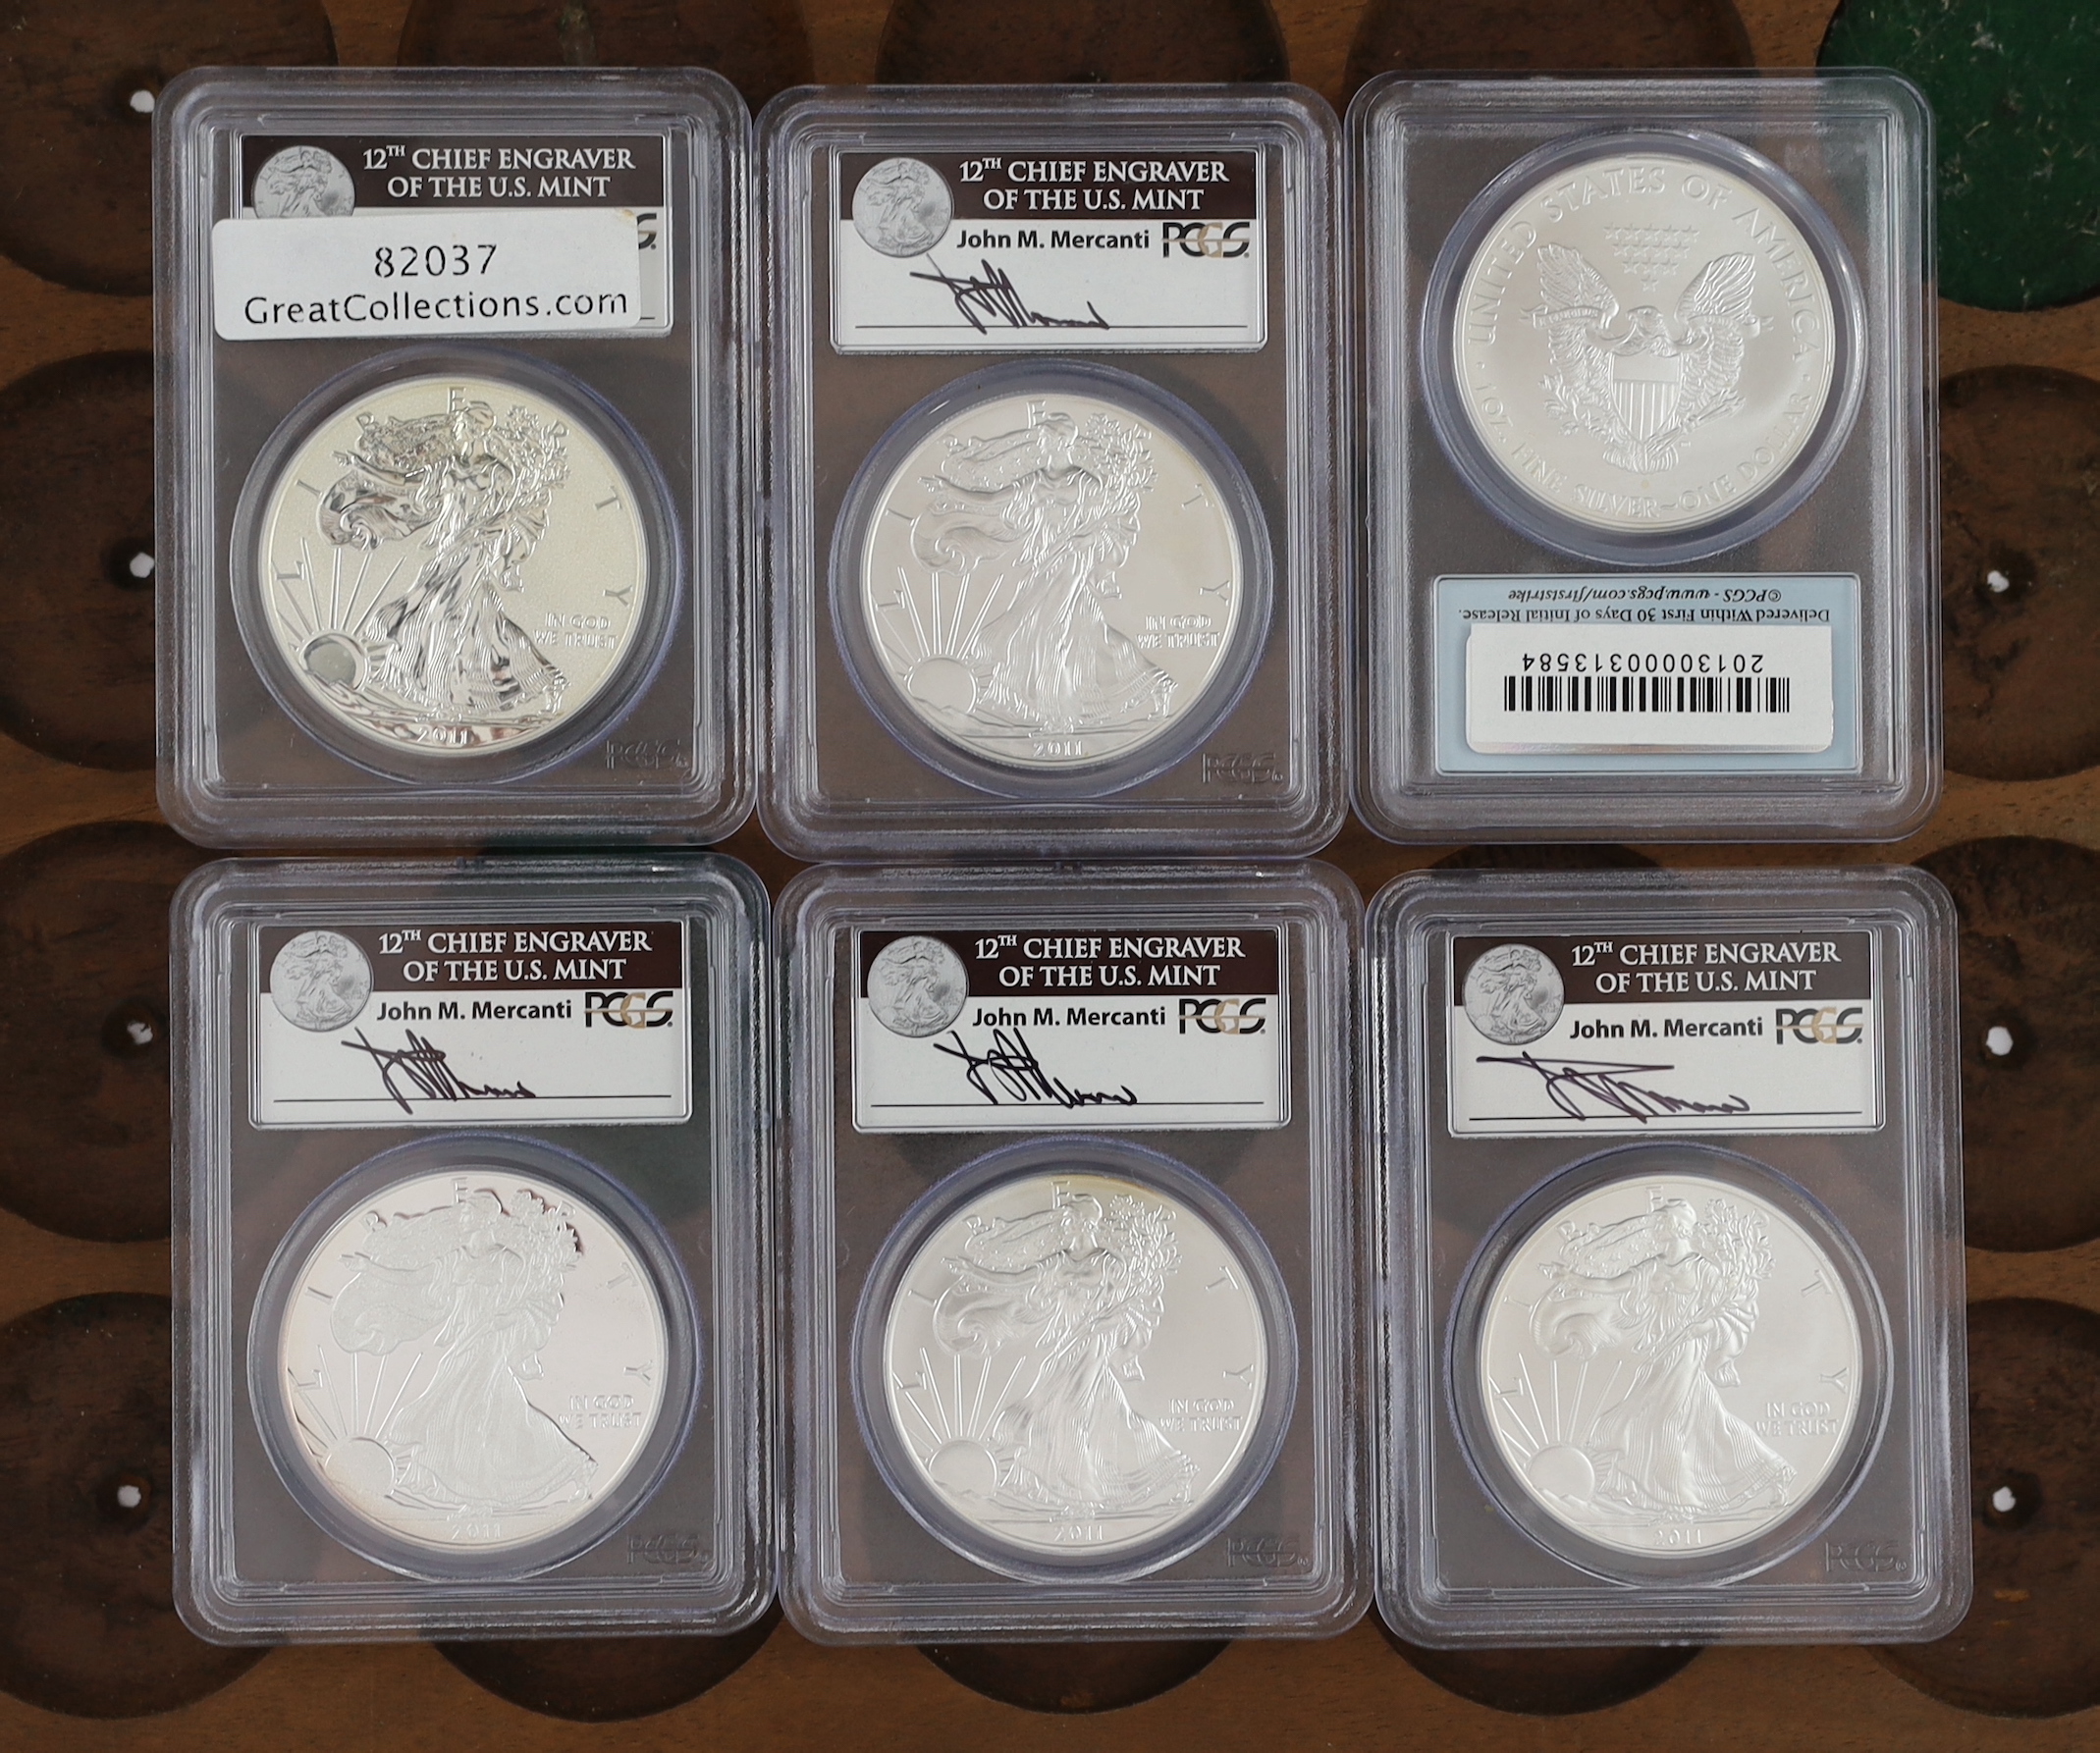 US coins, five first strike silver eagle $1, (2011, two 2011-W, 2011-P, 2011-S) a 2013 silver eagle dollar, all PCGS sealed and graded MS70 or PR70 (6)